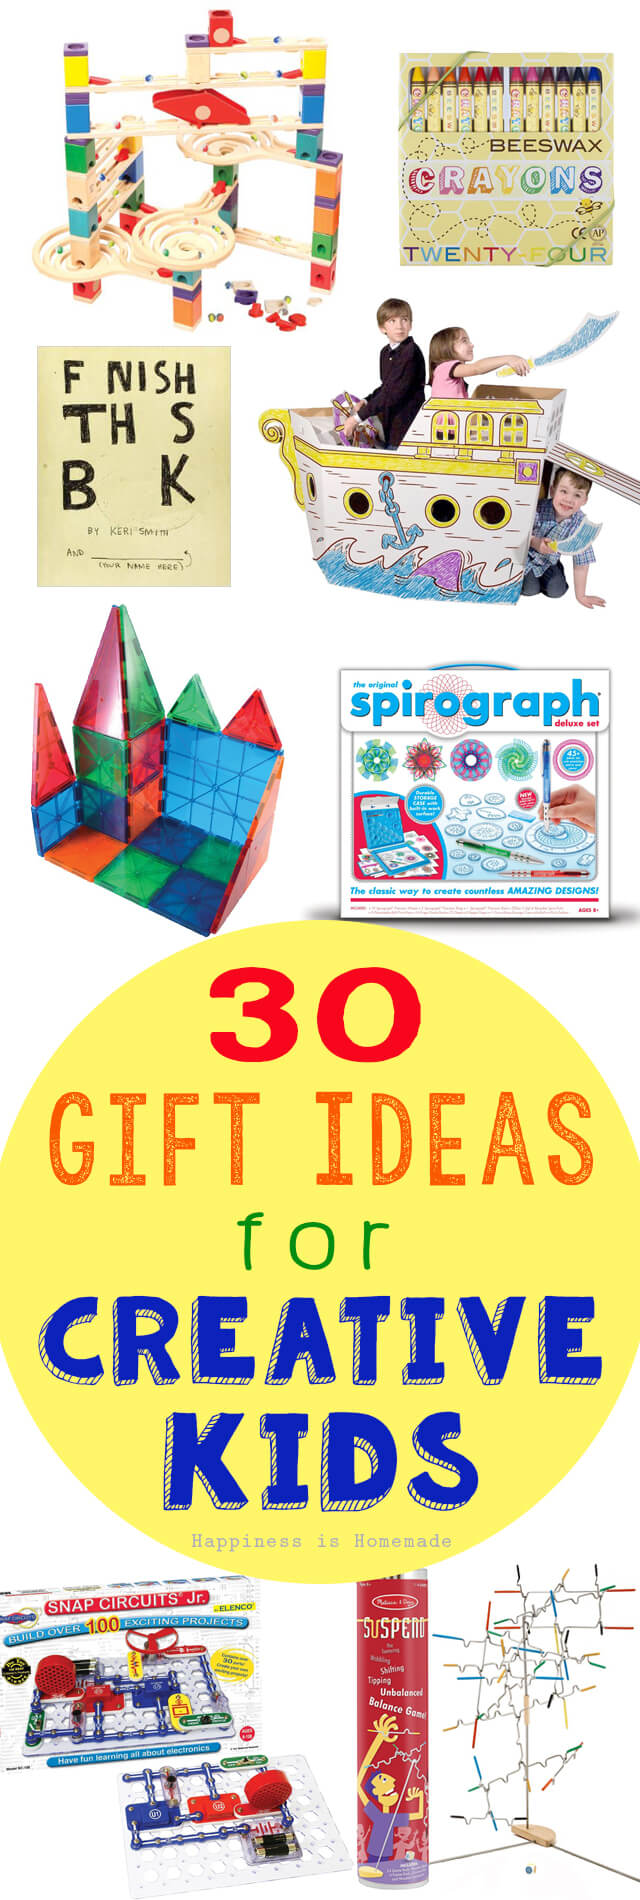 30+ Gift Ideas for Creative Kids - Happiness is Homemade